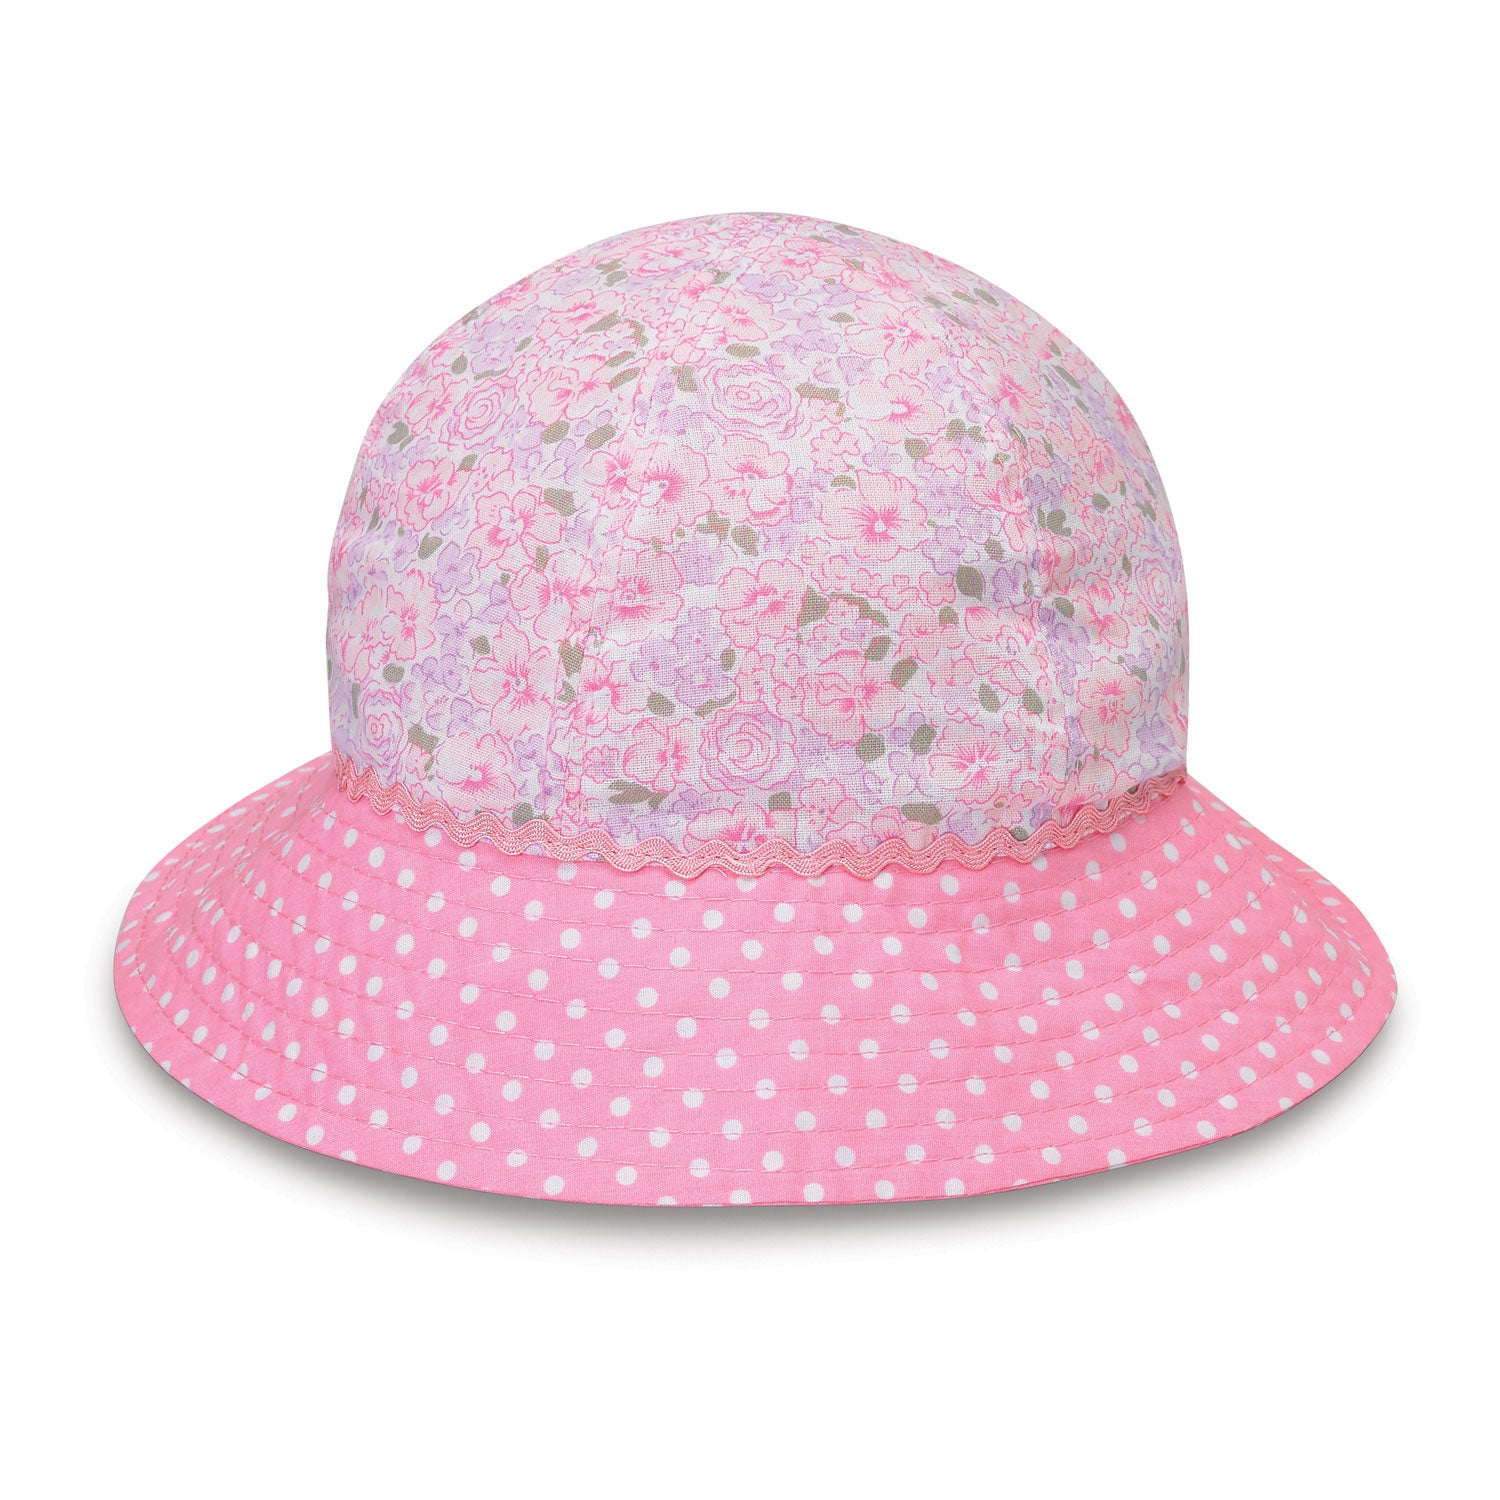 Featuring Children's adjustable bucket style sun hat, made with UPF 50 material